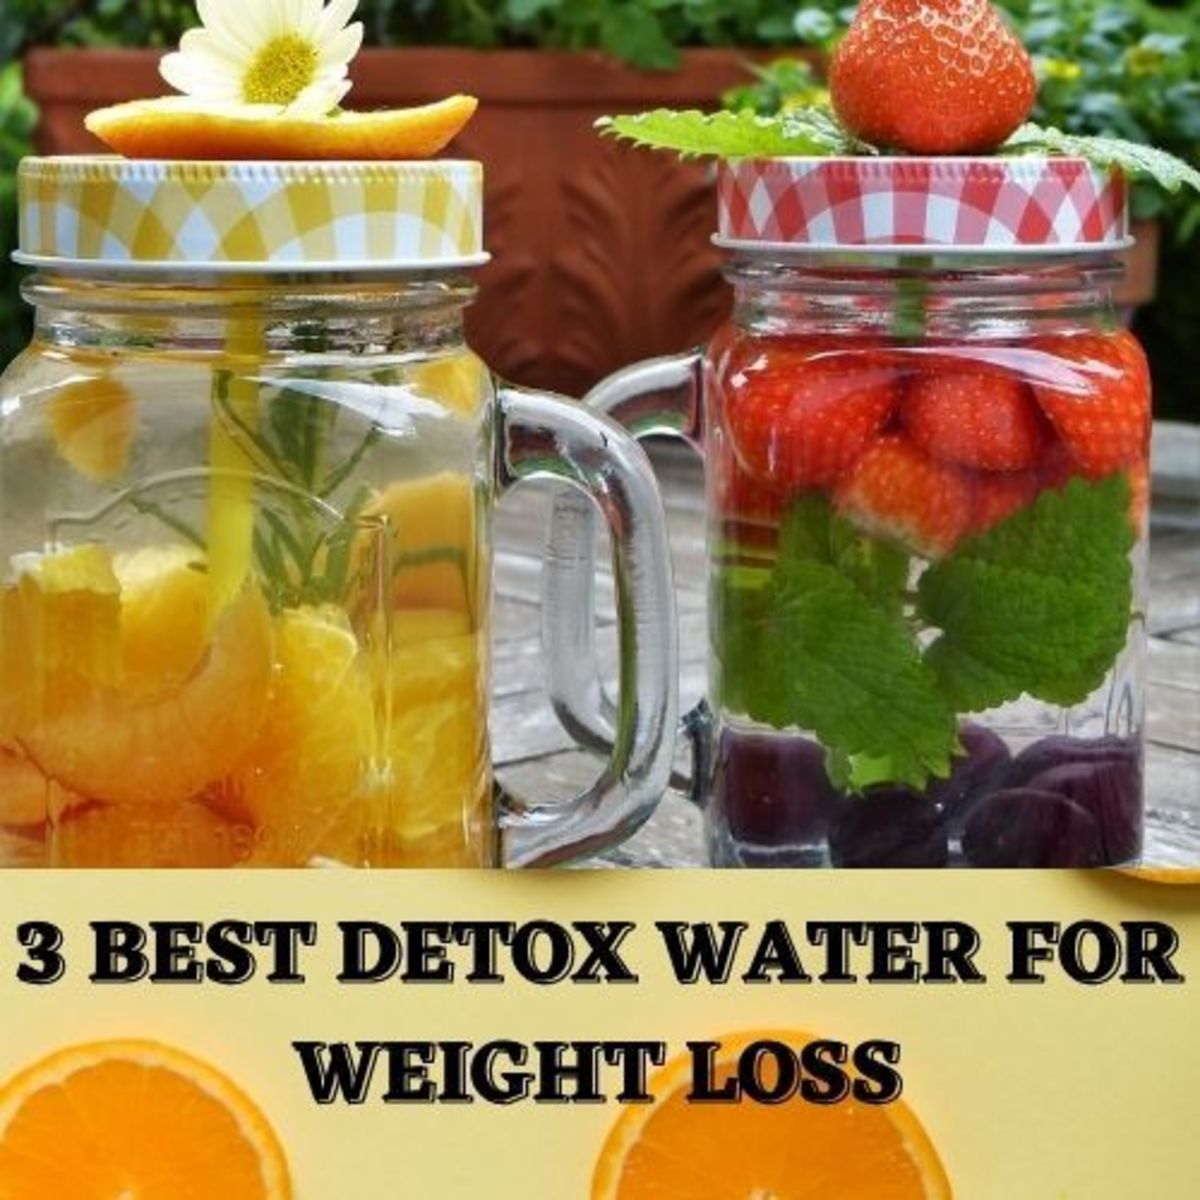 3 Best Detox Water for Weight Loss